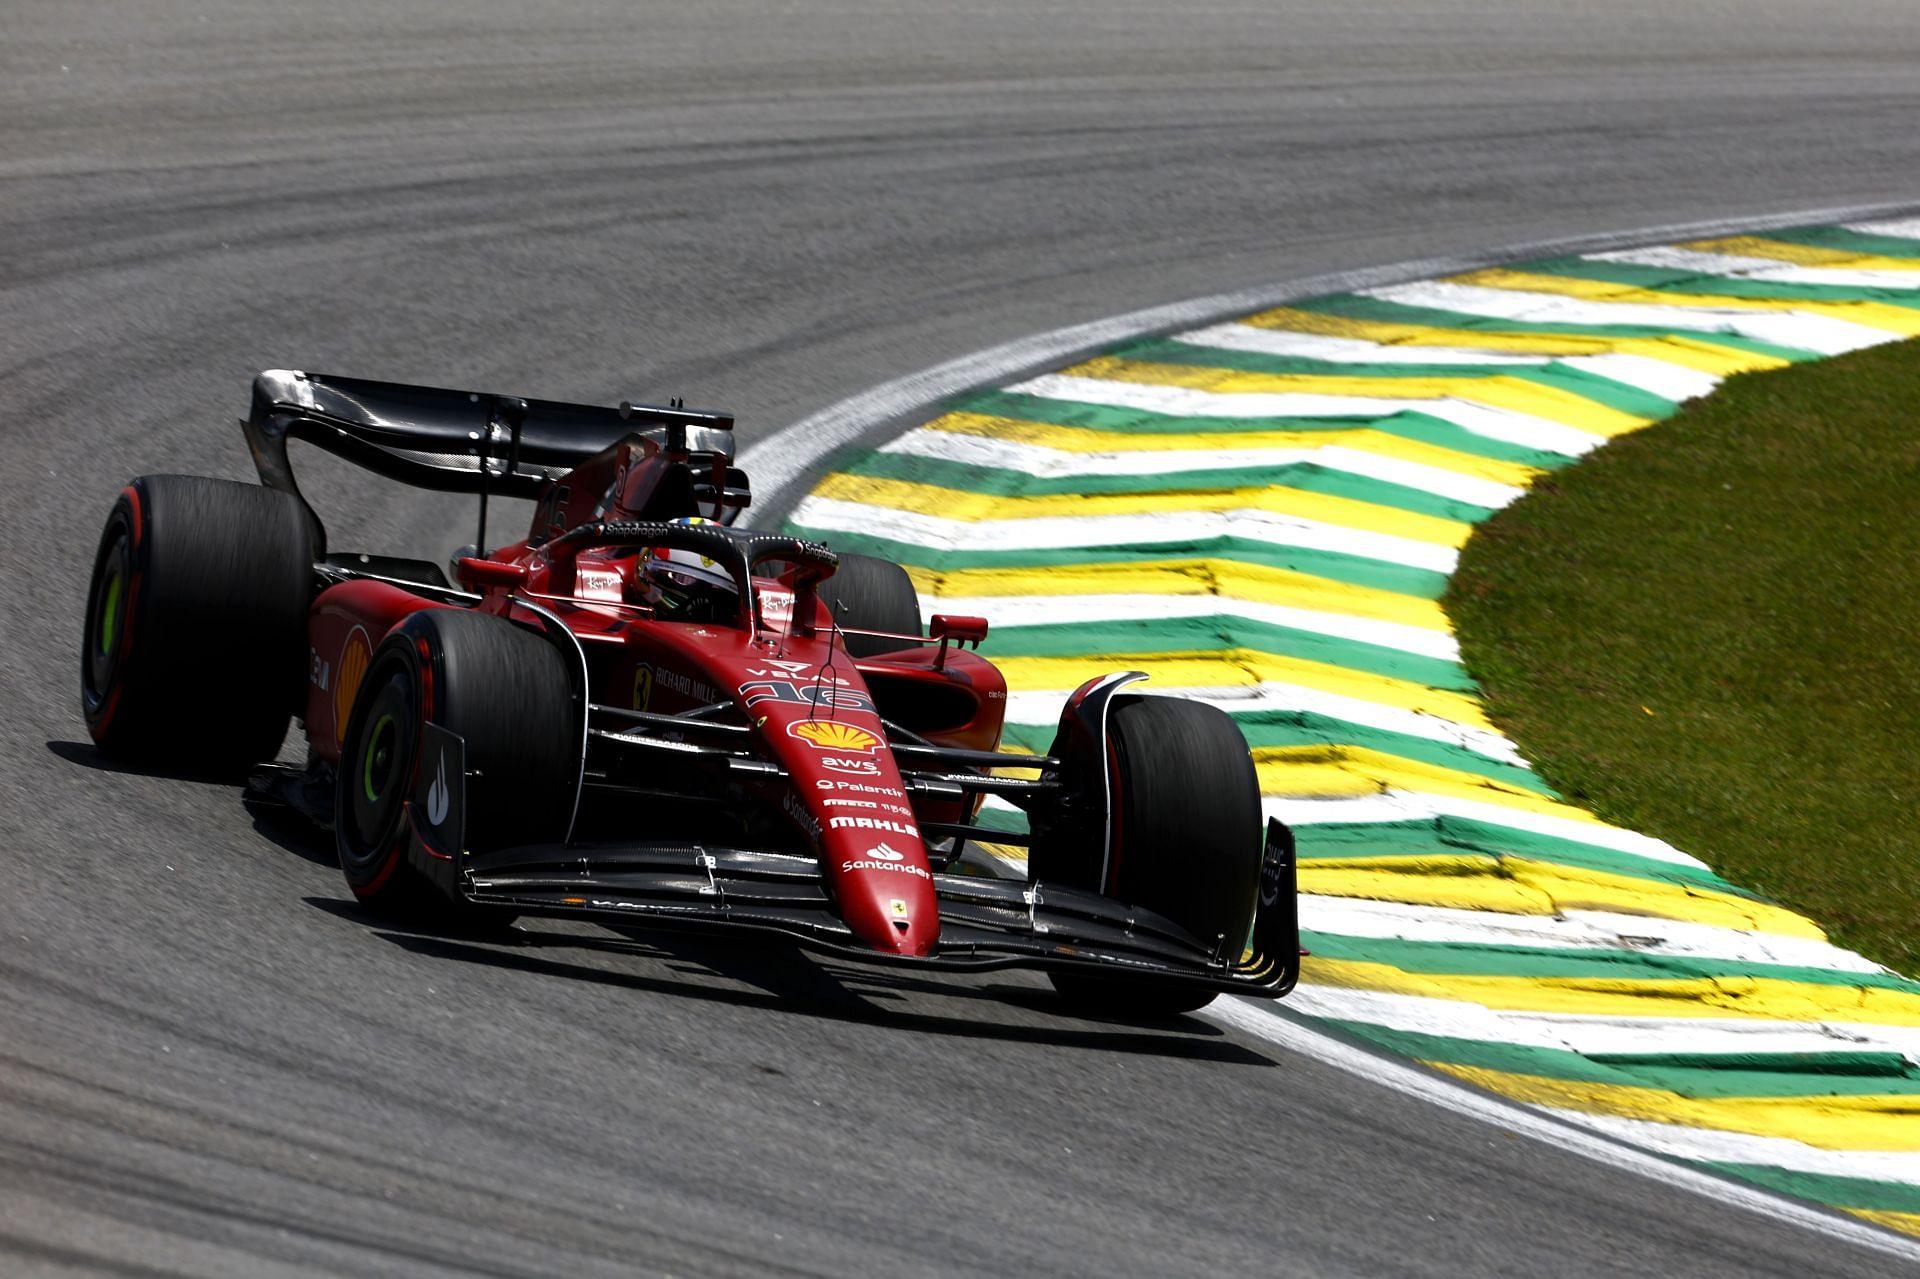 Ferrari S F1 Car Has Lost Weight Going Even Below The Limit